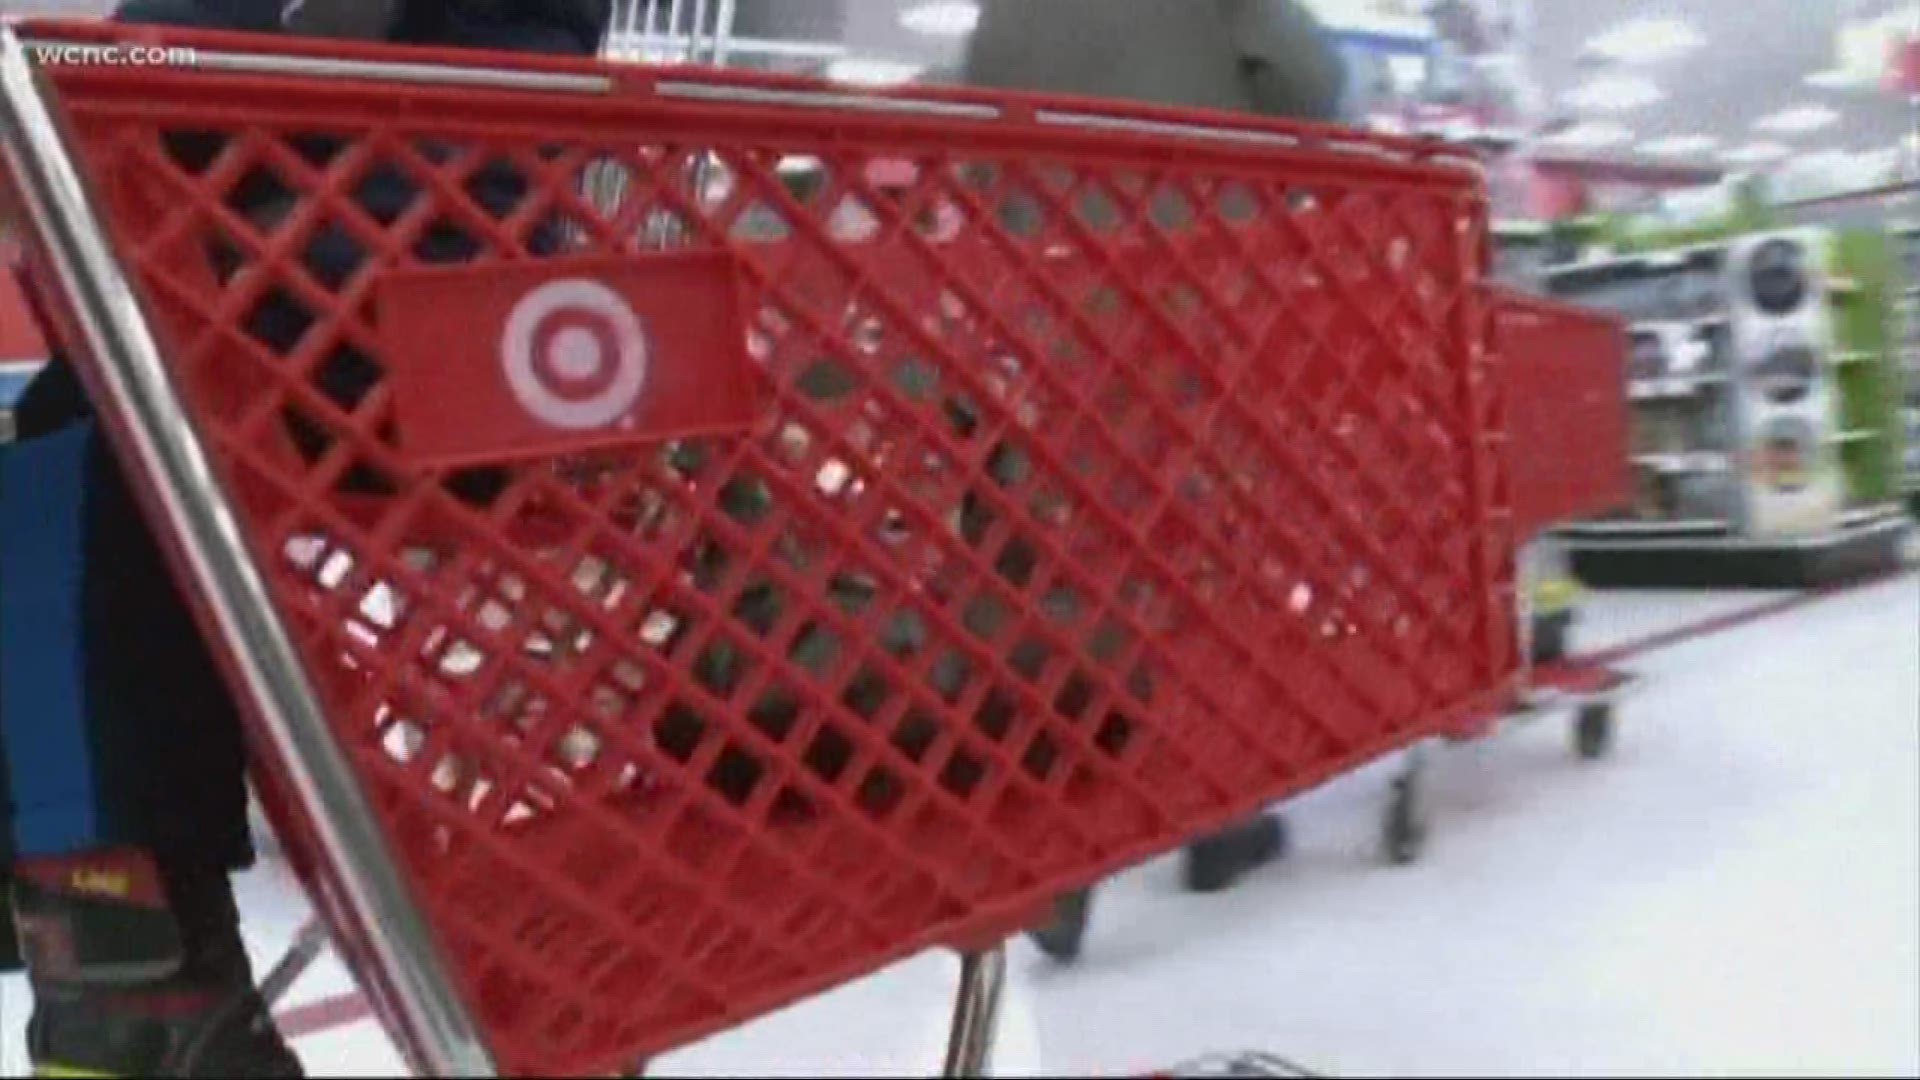 Target announced that it will soon feature 30 new Cloud Island products in its stores for new parents, with most of the items costing under $10.